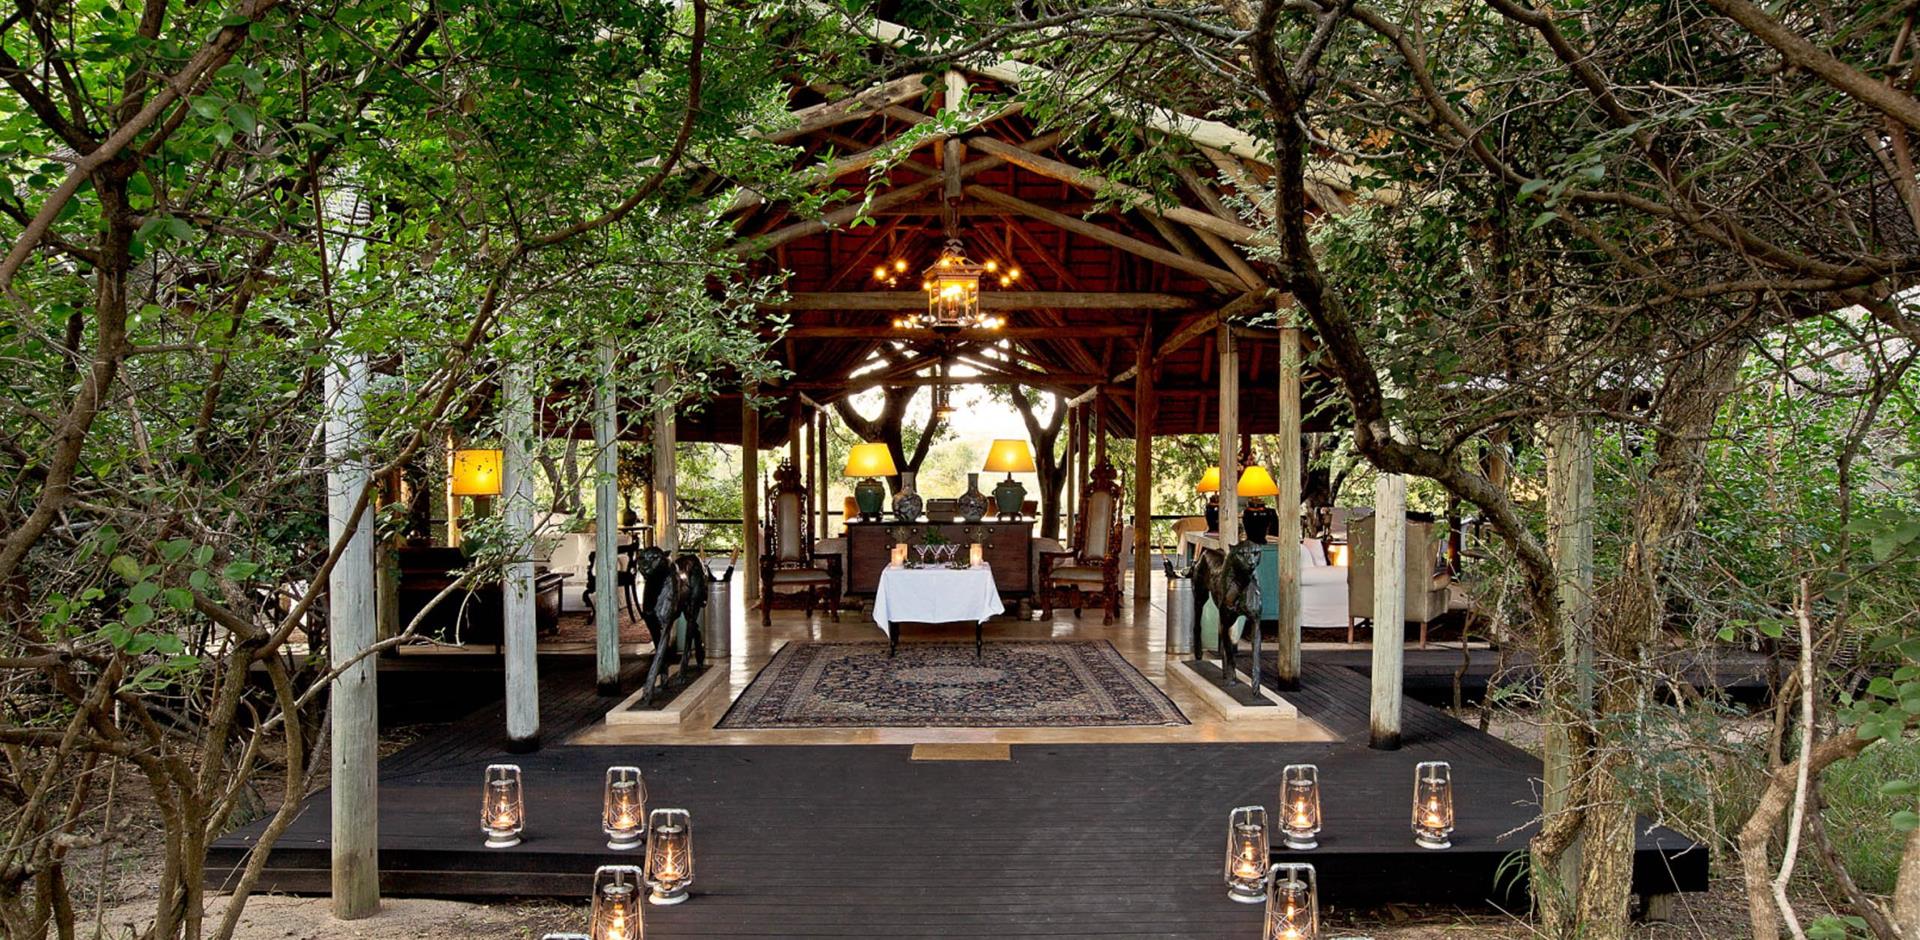 Entrance, The Lodge at Royal Malewane, South Africa, A&K